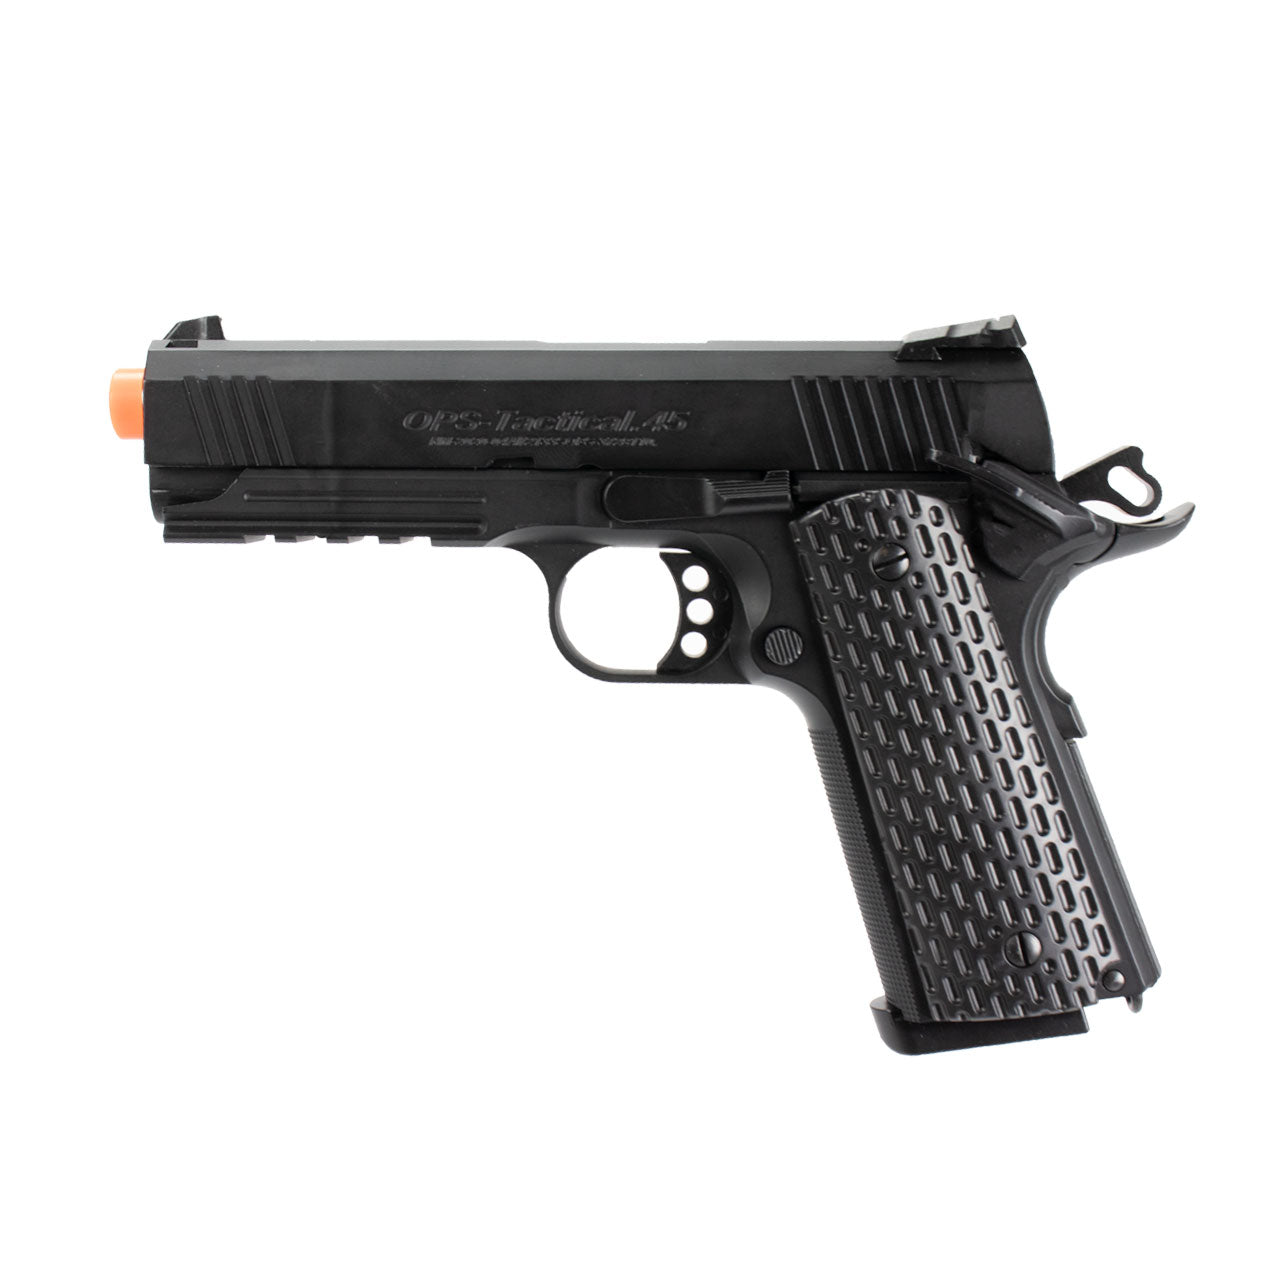 GE / JG OPS 1911 Tactical Full Metal GBB Gas Blow Back Airsoft Pistol